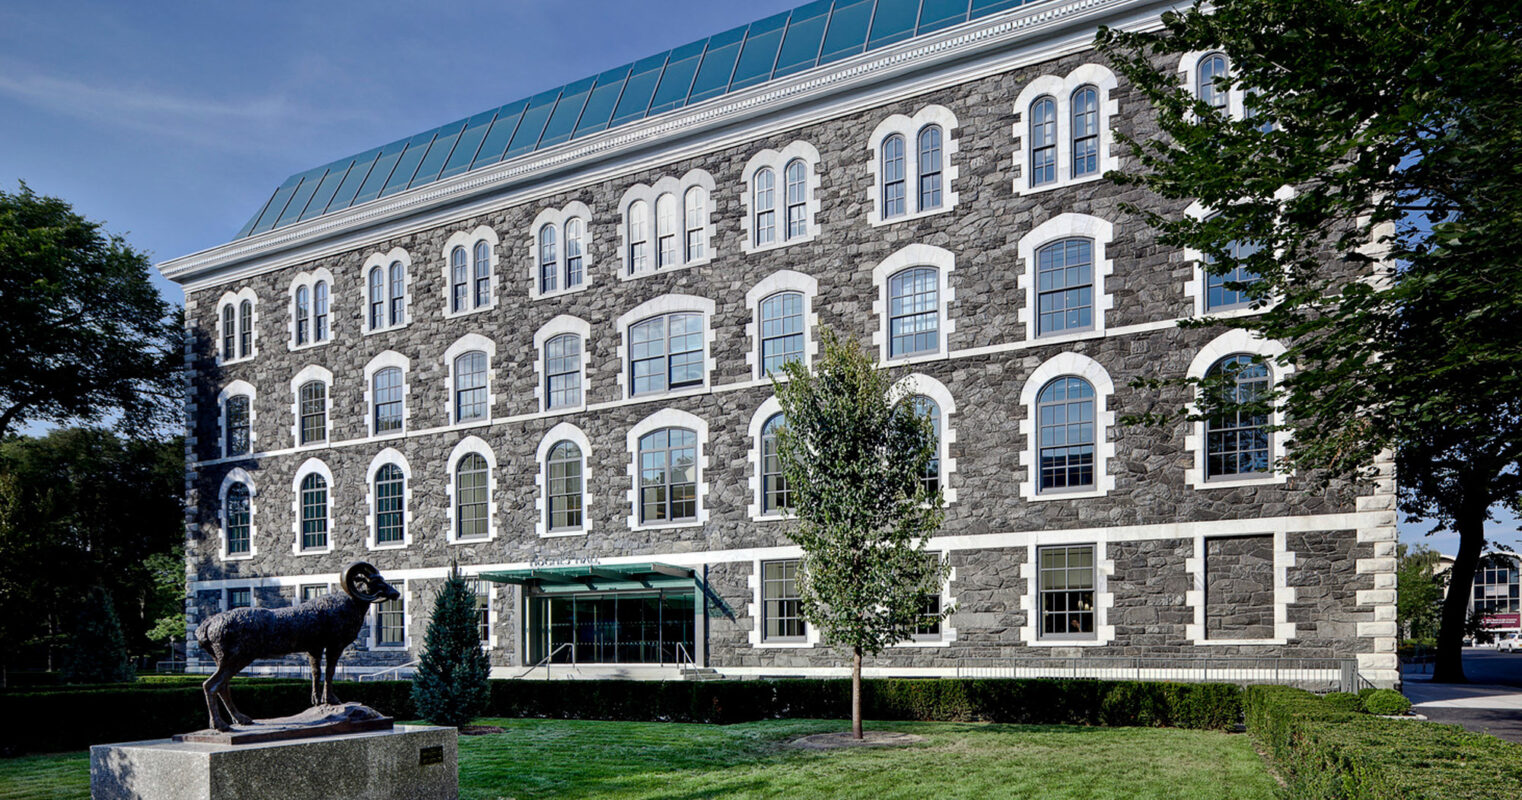 Exterior of a renovated historical building, showcasing a well-preserved stone facade, symmetrically aligned arched windows, and a modern glass rooftop addition that contrasts with the traditional architecture below. A sculptural art piece adorns the manicured front lawn.